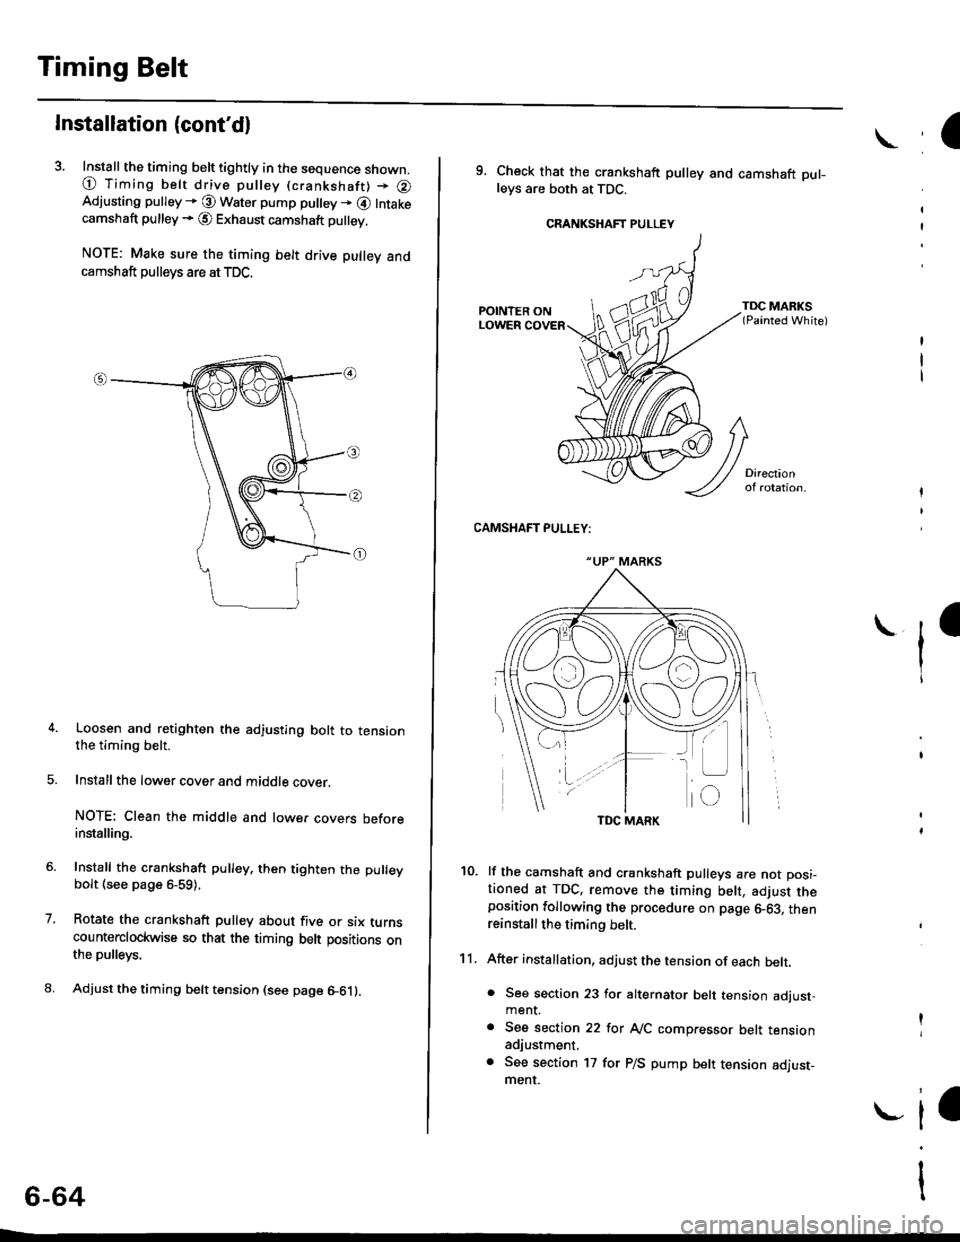 HONDA CIVIC 1998 6.G Workshop Manual Timing Belt
lnstallation (contdl
3. Install the timing belt tightly in the sequence shown.
@ Timing belt drive pulley (crankshaft) + @Adjusting pulley * @ Water pump pu ey + @ Intakecamshaft pulley +